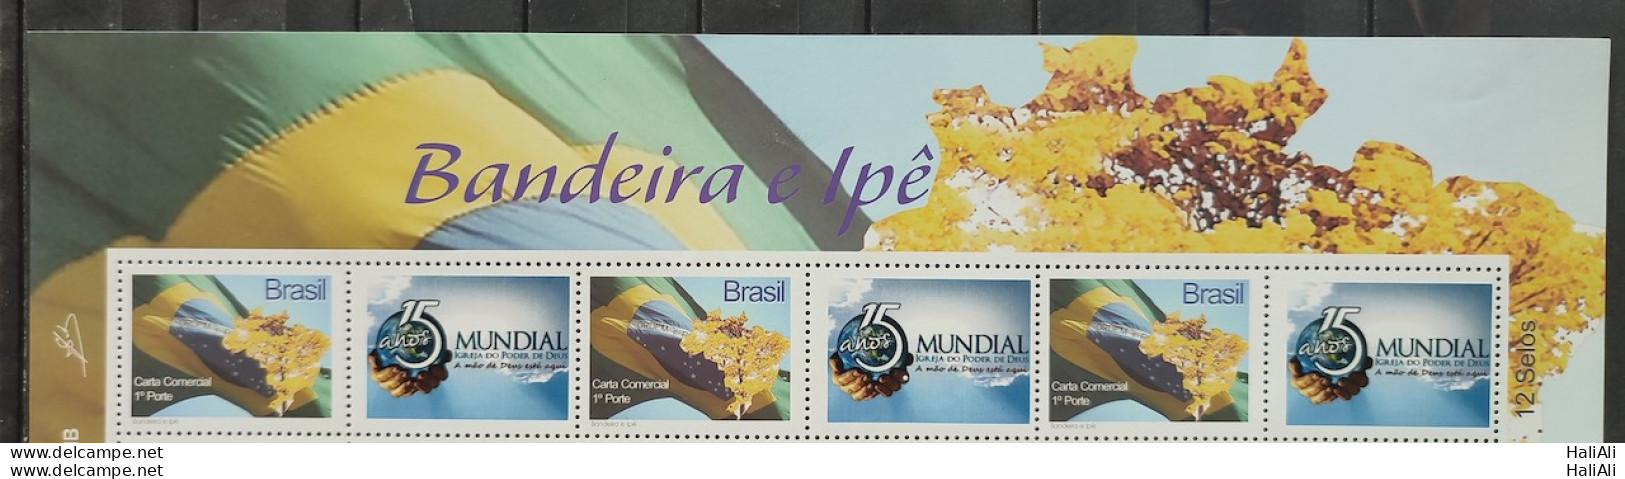 C 2853 Brazil Personalized Stamp Tourism Ipe Flag Church Religion 2009 Vignette 3 Units - Personalized Stamps